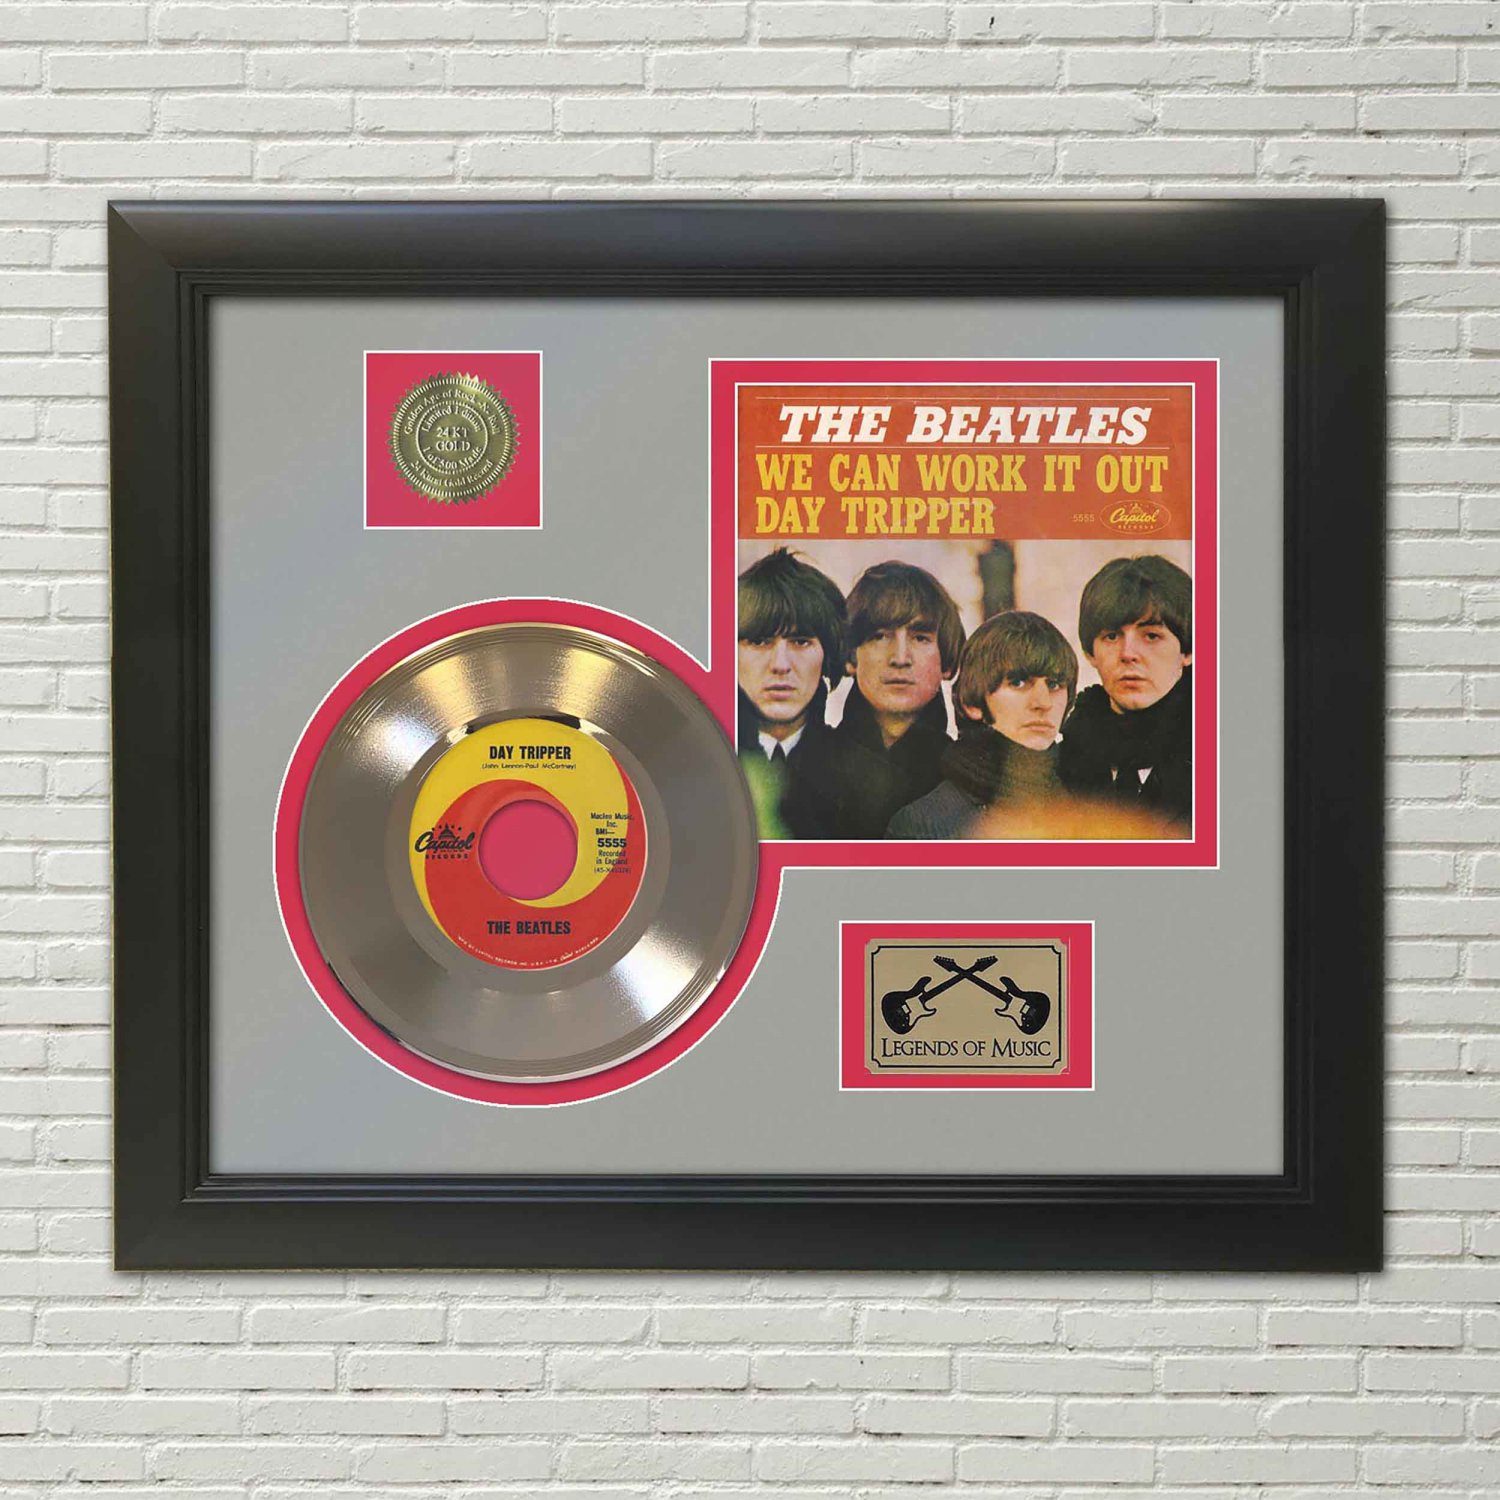 THE BEATLES "Day Tripper" Framed Picture Sleeve Gold 45 Record Display